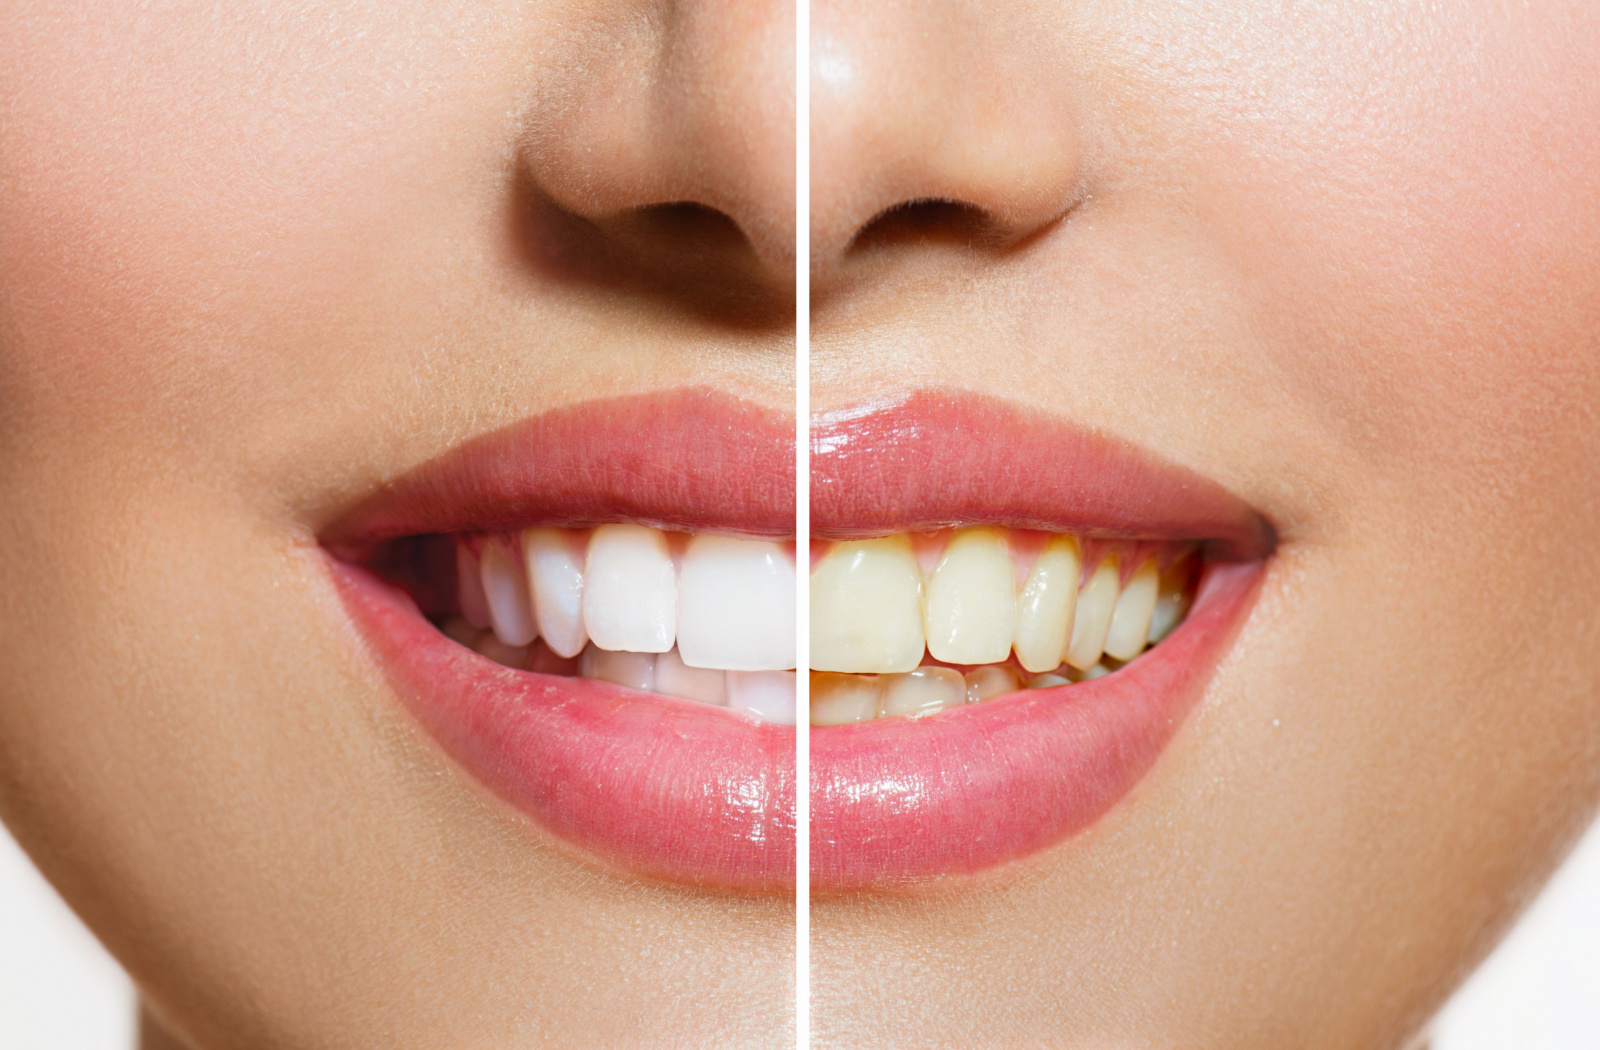 A divided perspective of a woman illustrating the contrast between her white and yellow teeth.